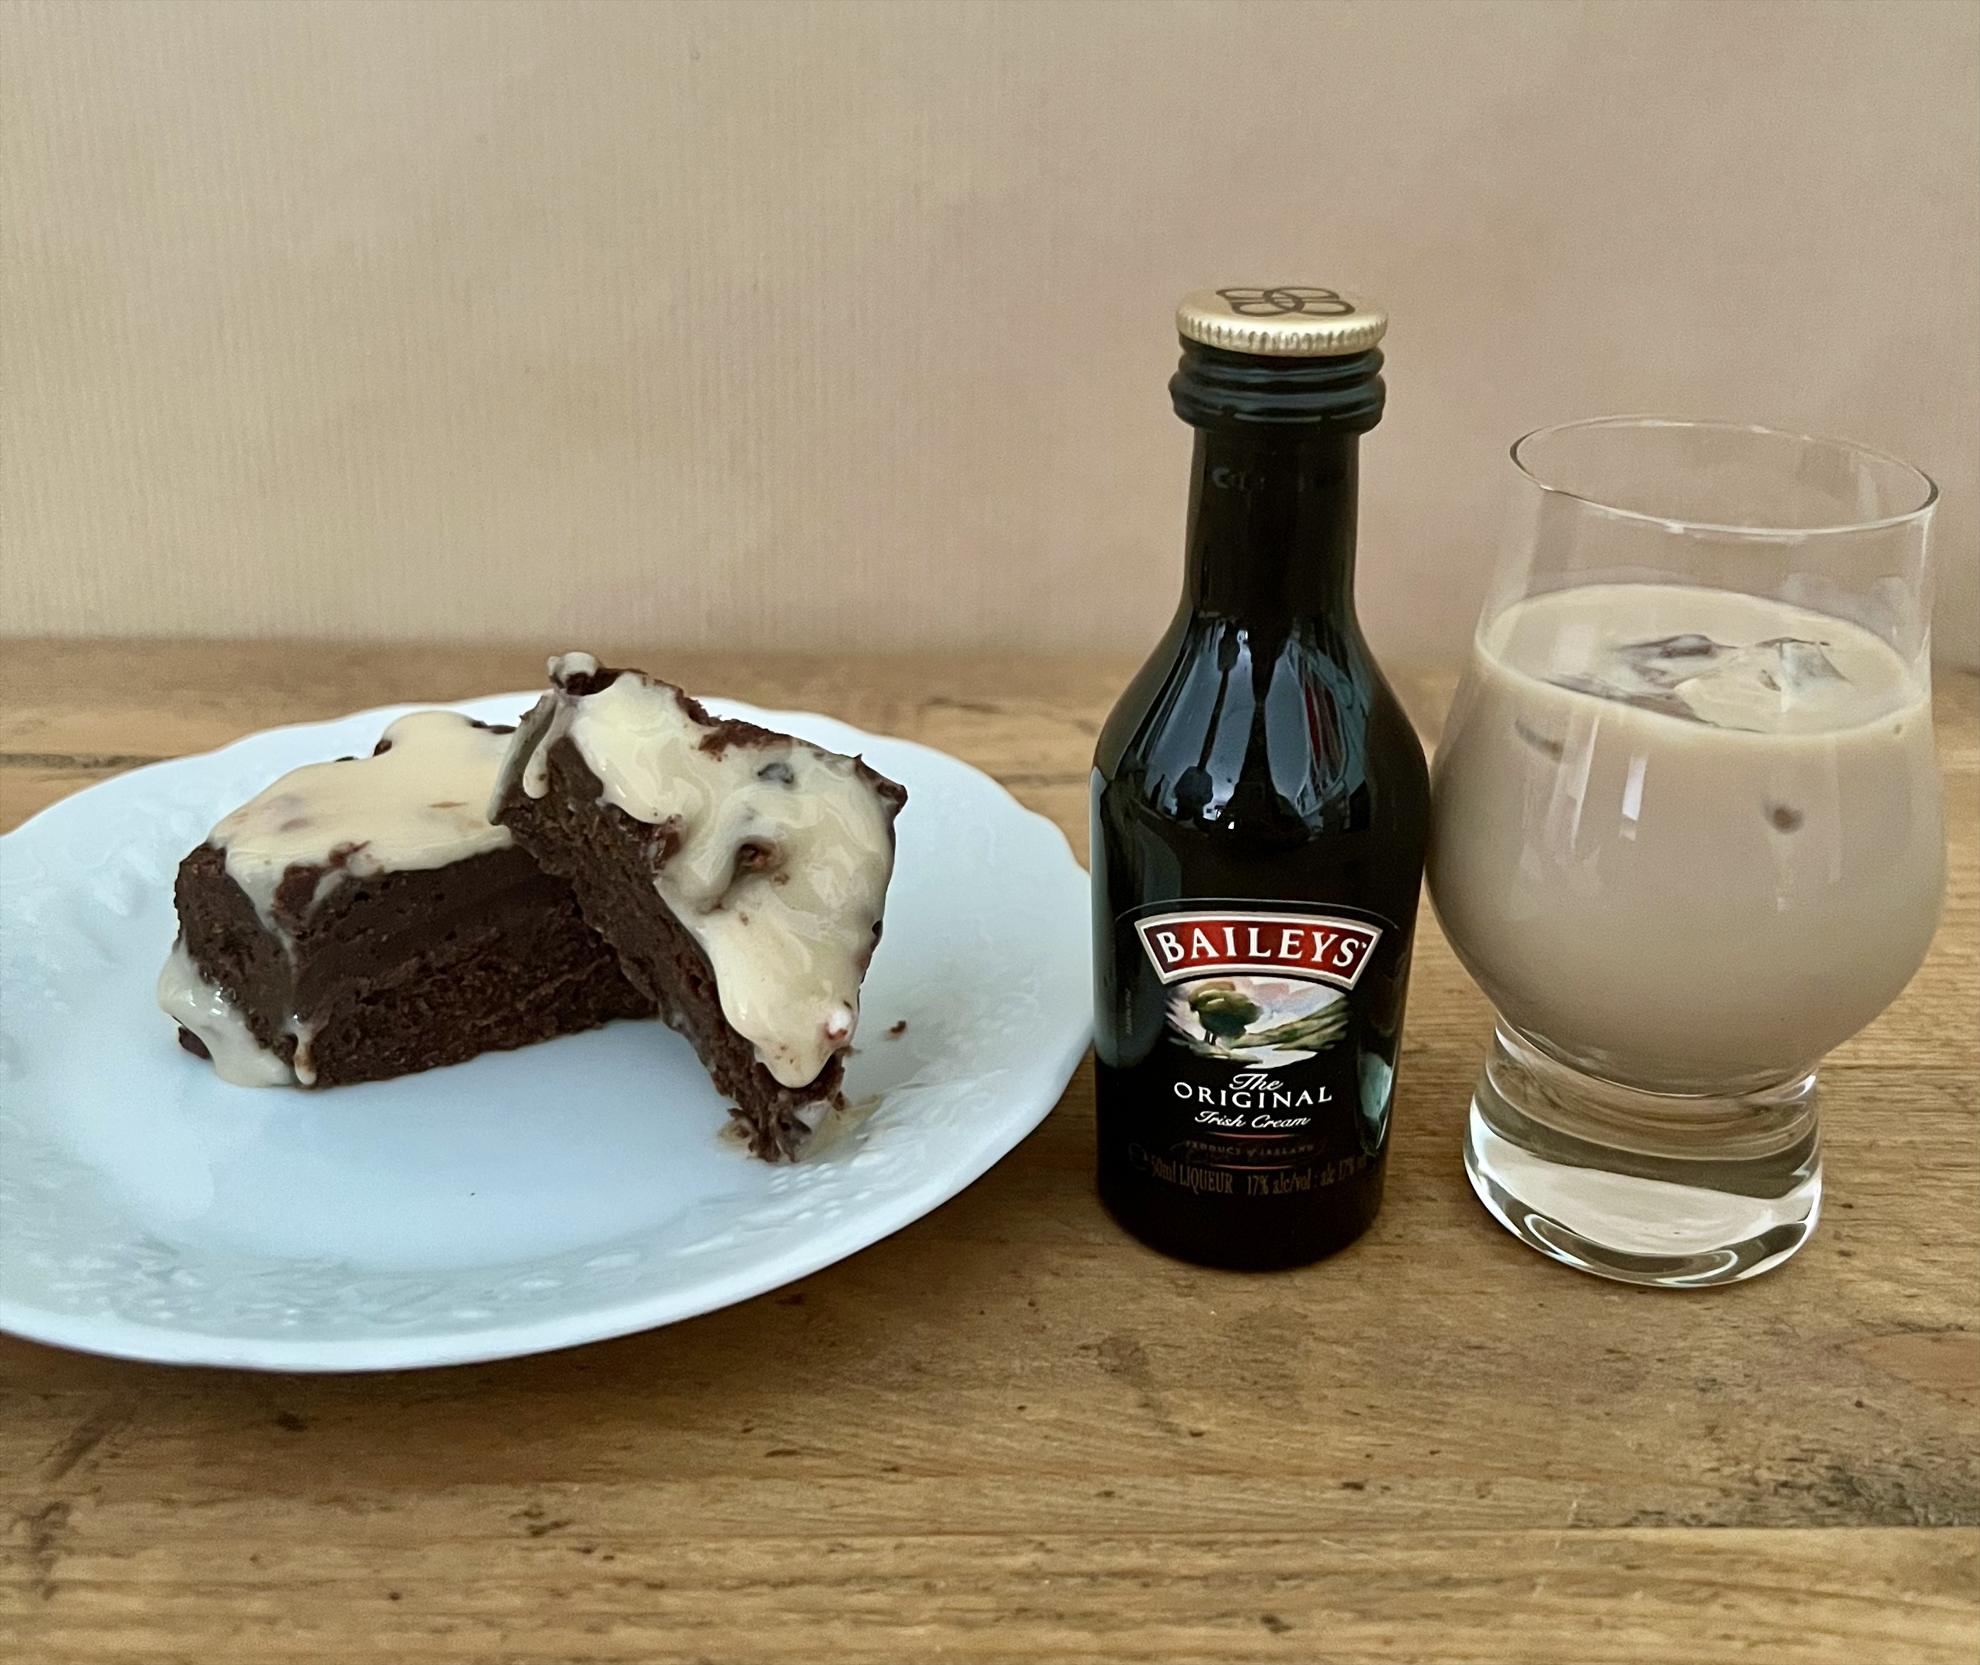 Picture of Baileys Chocolate Brownie with glass of Baileys